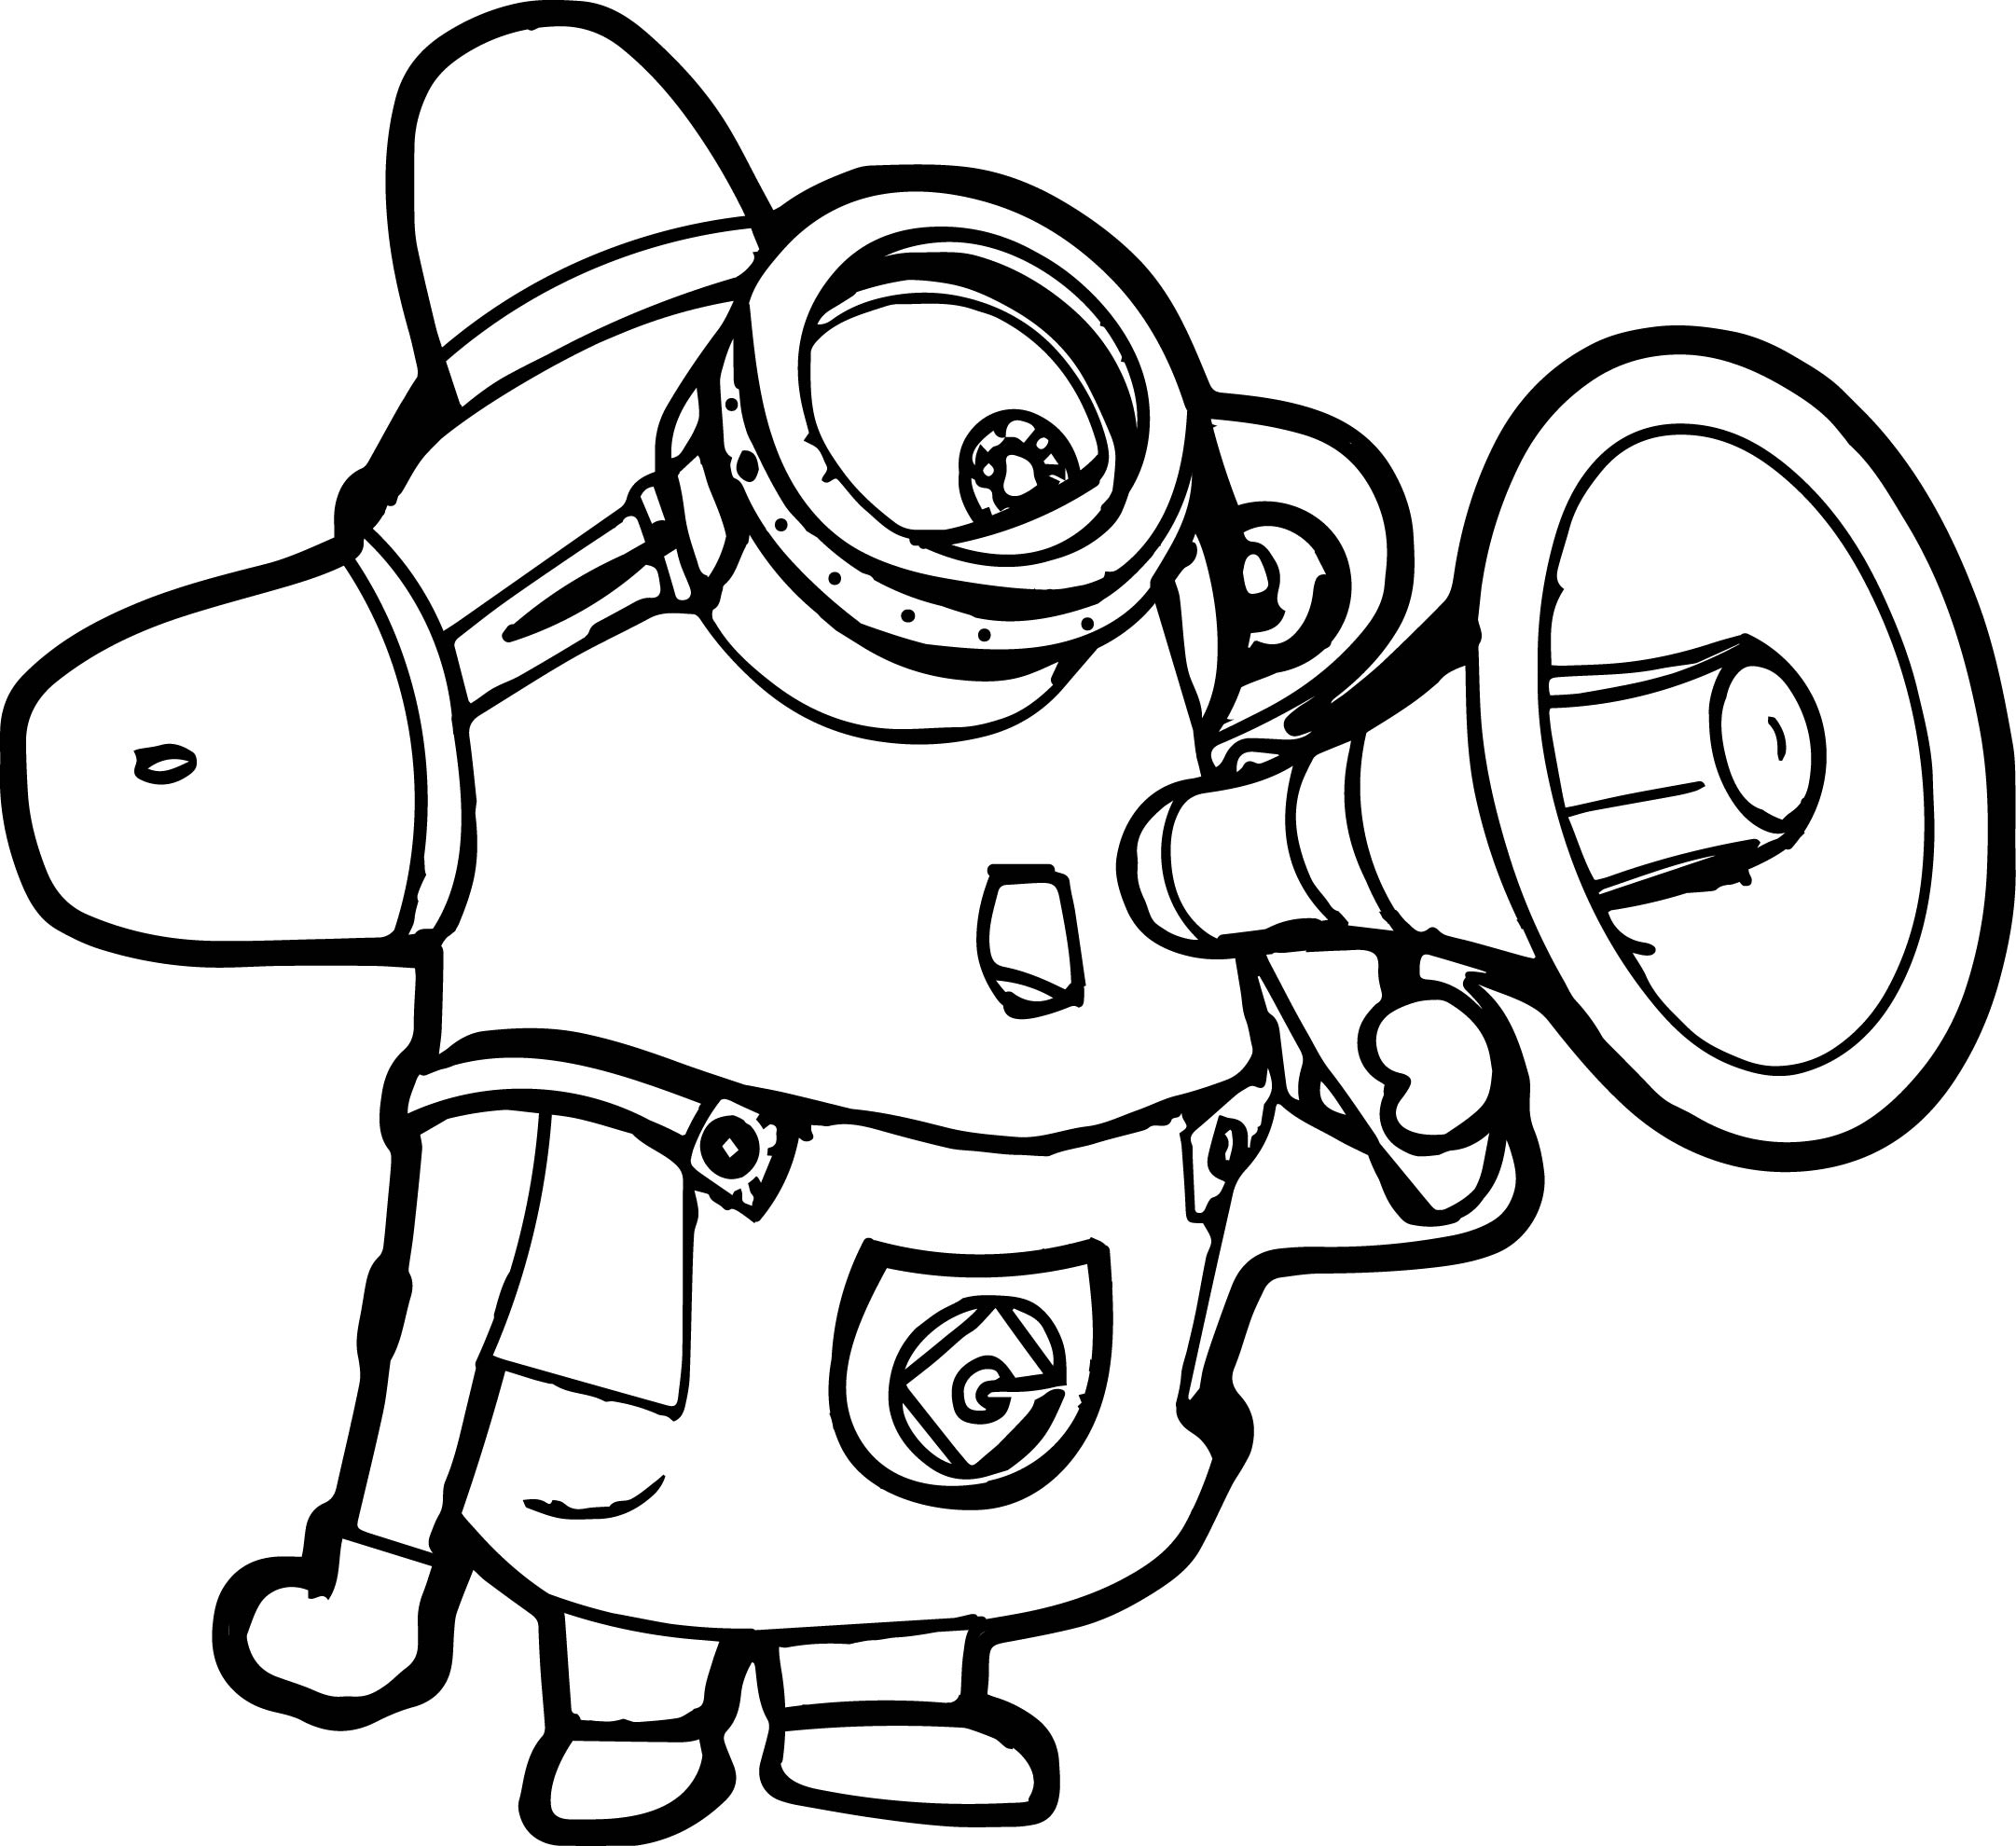 minion-coloring-pages-best-coloring-pages-for-kids